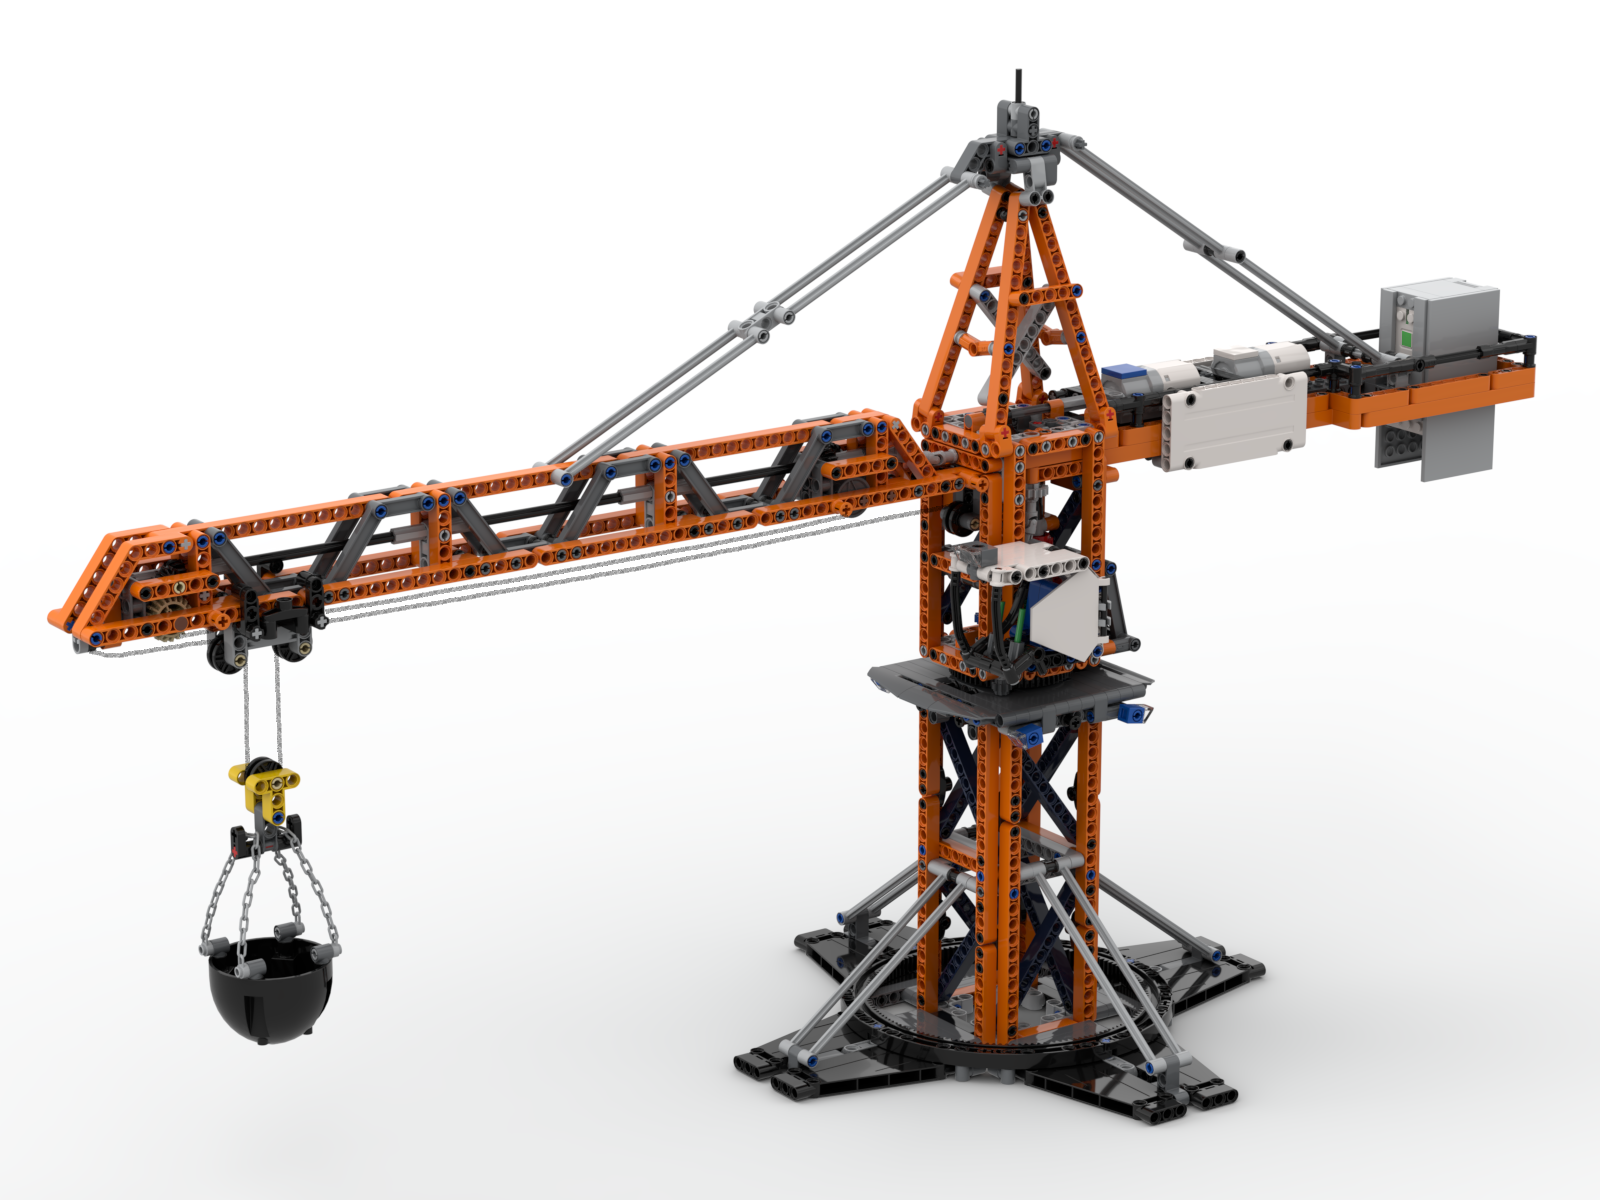 Remote Controlled Tower Crane - MOC - LEGO Technic, Mindstorms, Model Team  and Scale Modeling - Eurobricks Forums